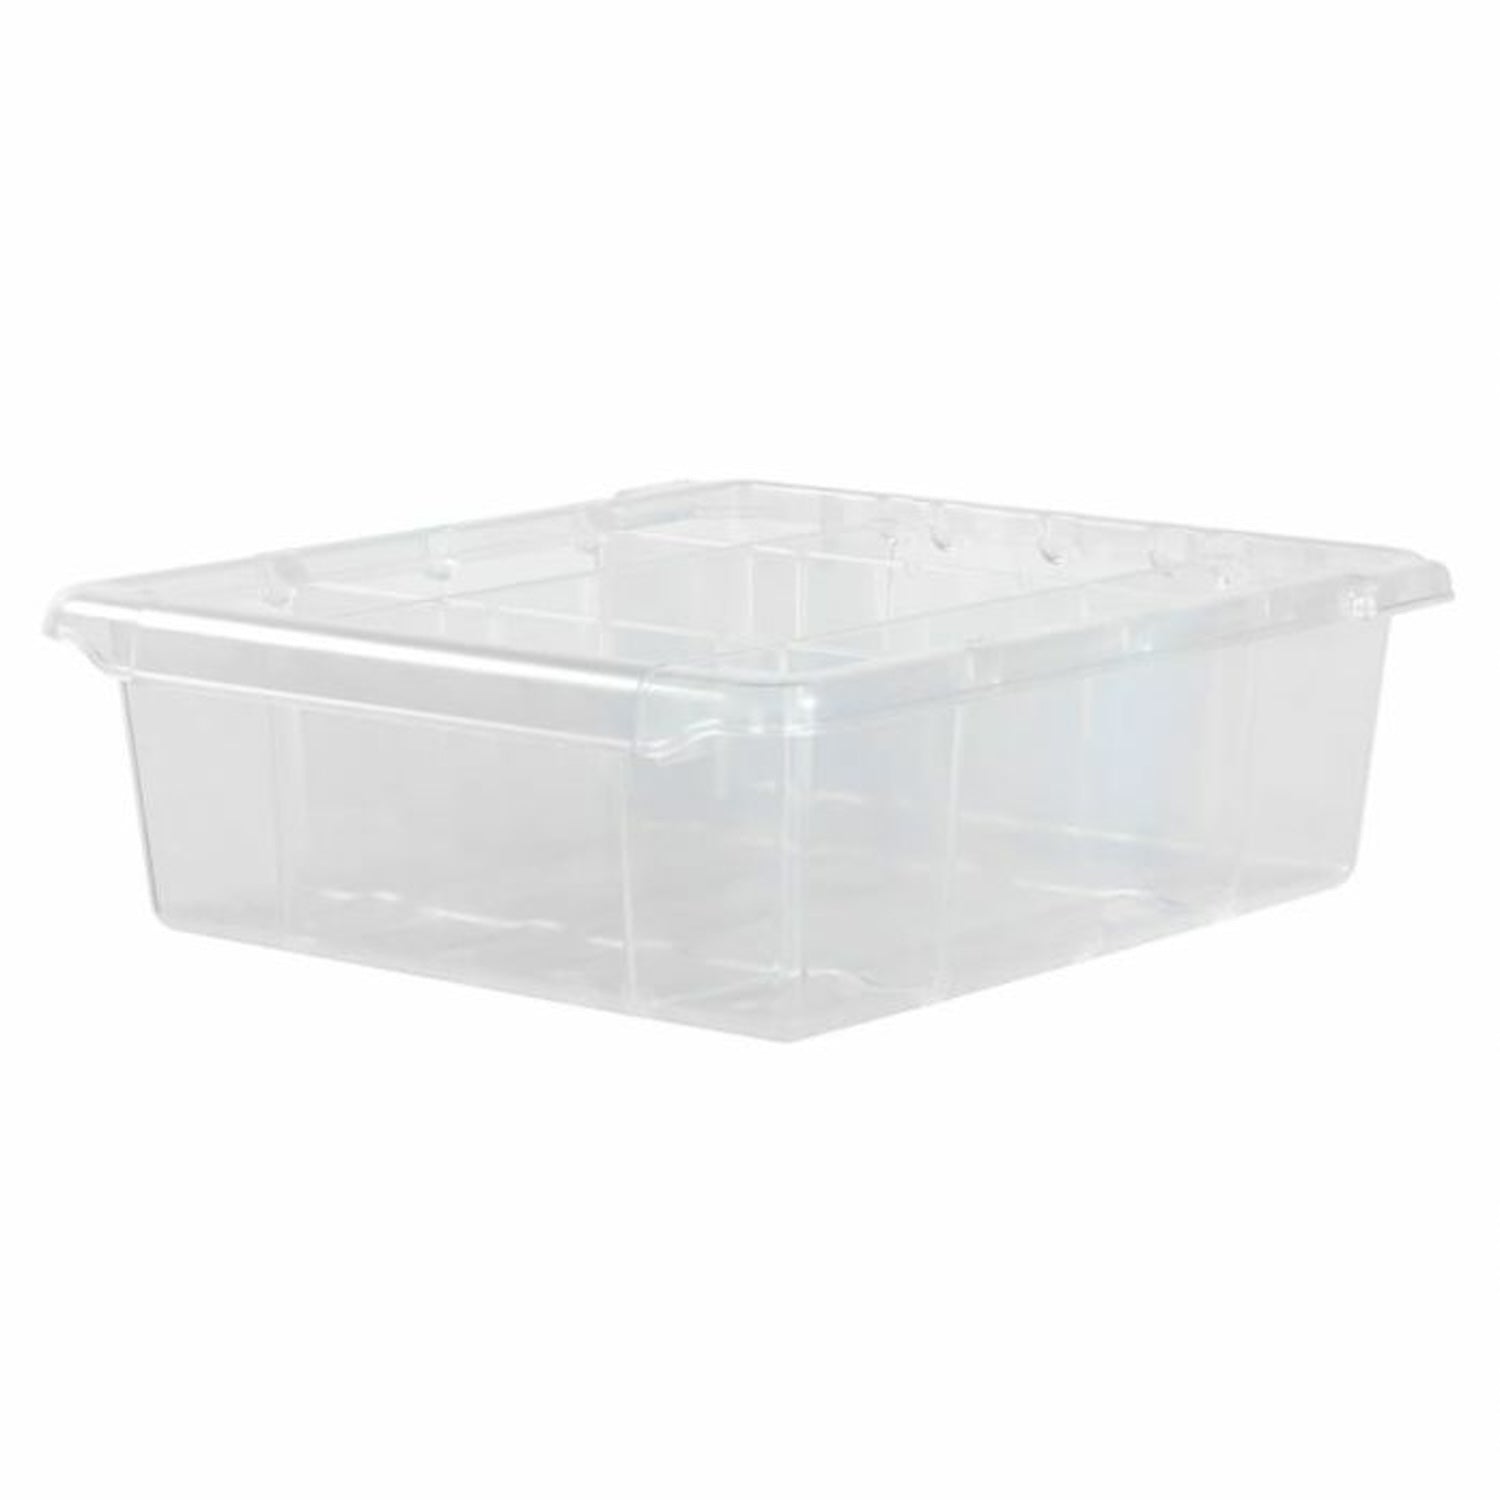 Caretray Deep Tray, 150mm with Dividers